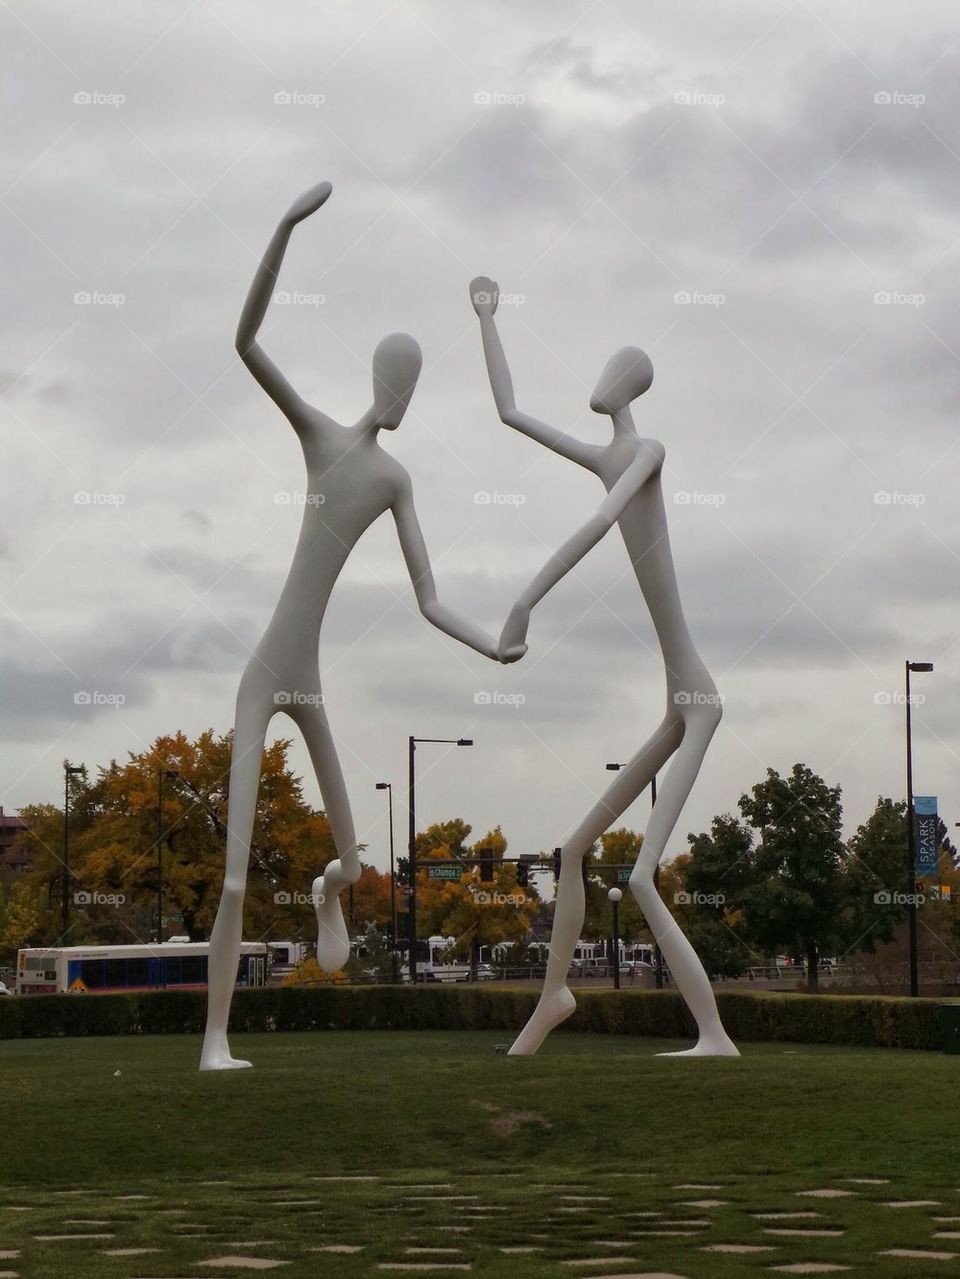 Denver Center of Performing Arts Statues